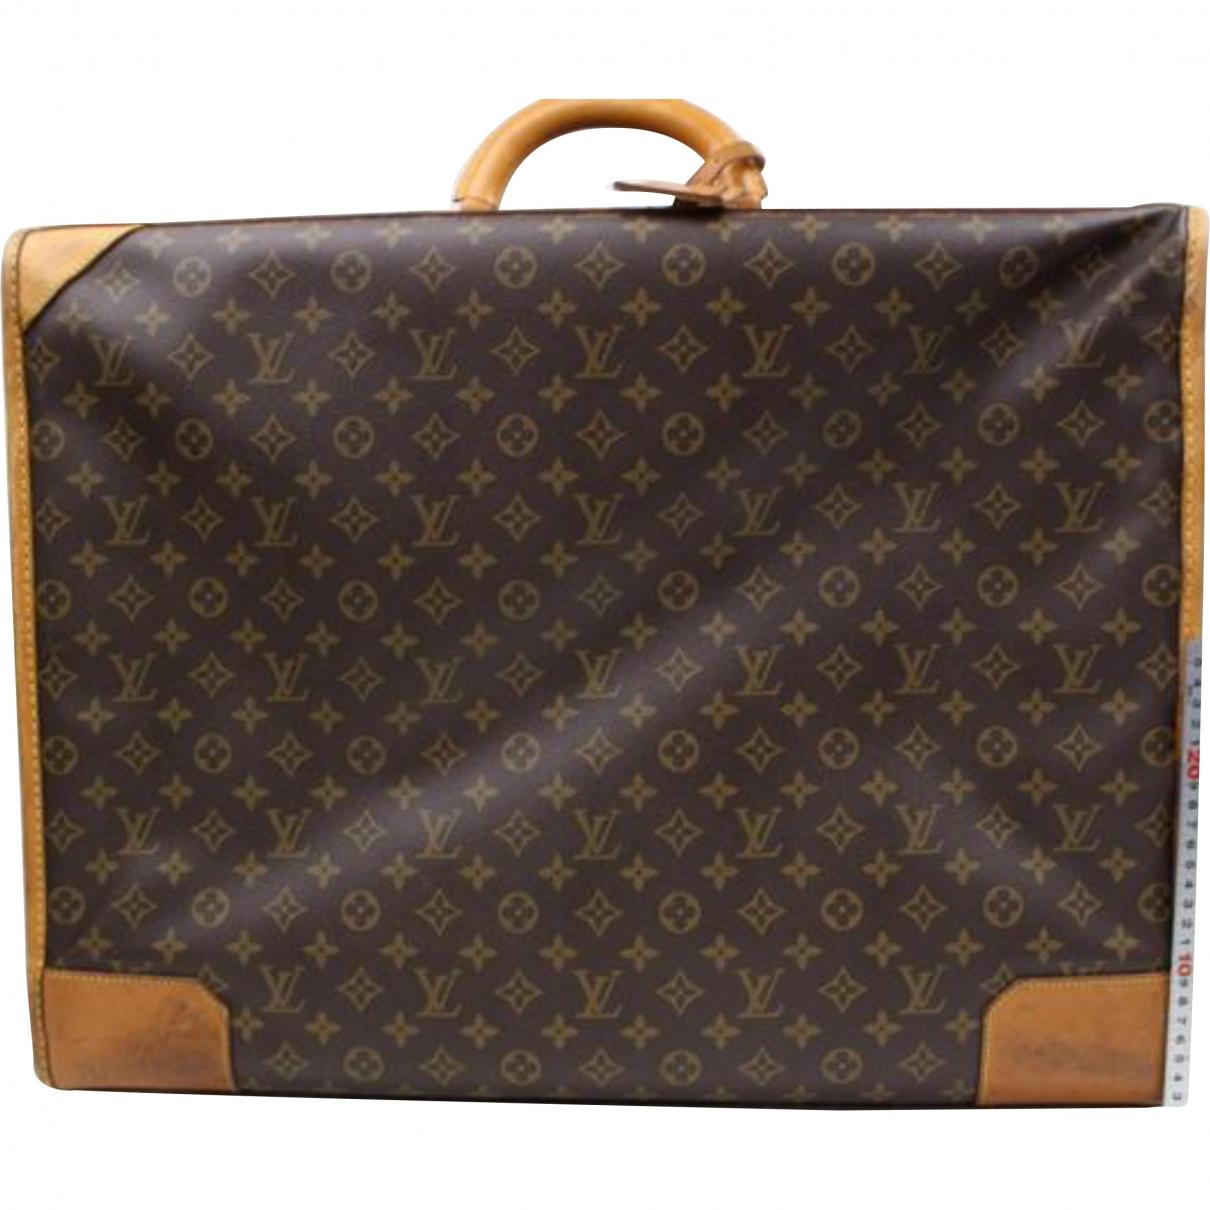 Lyst - Louis Vuitton Pre-owned Cloth Travel Bag in Brown for Men